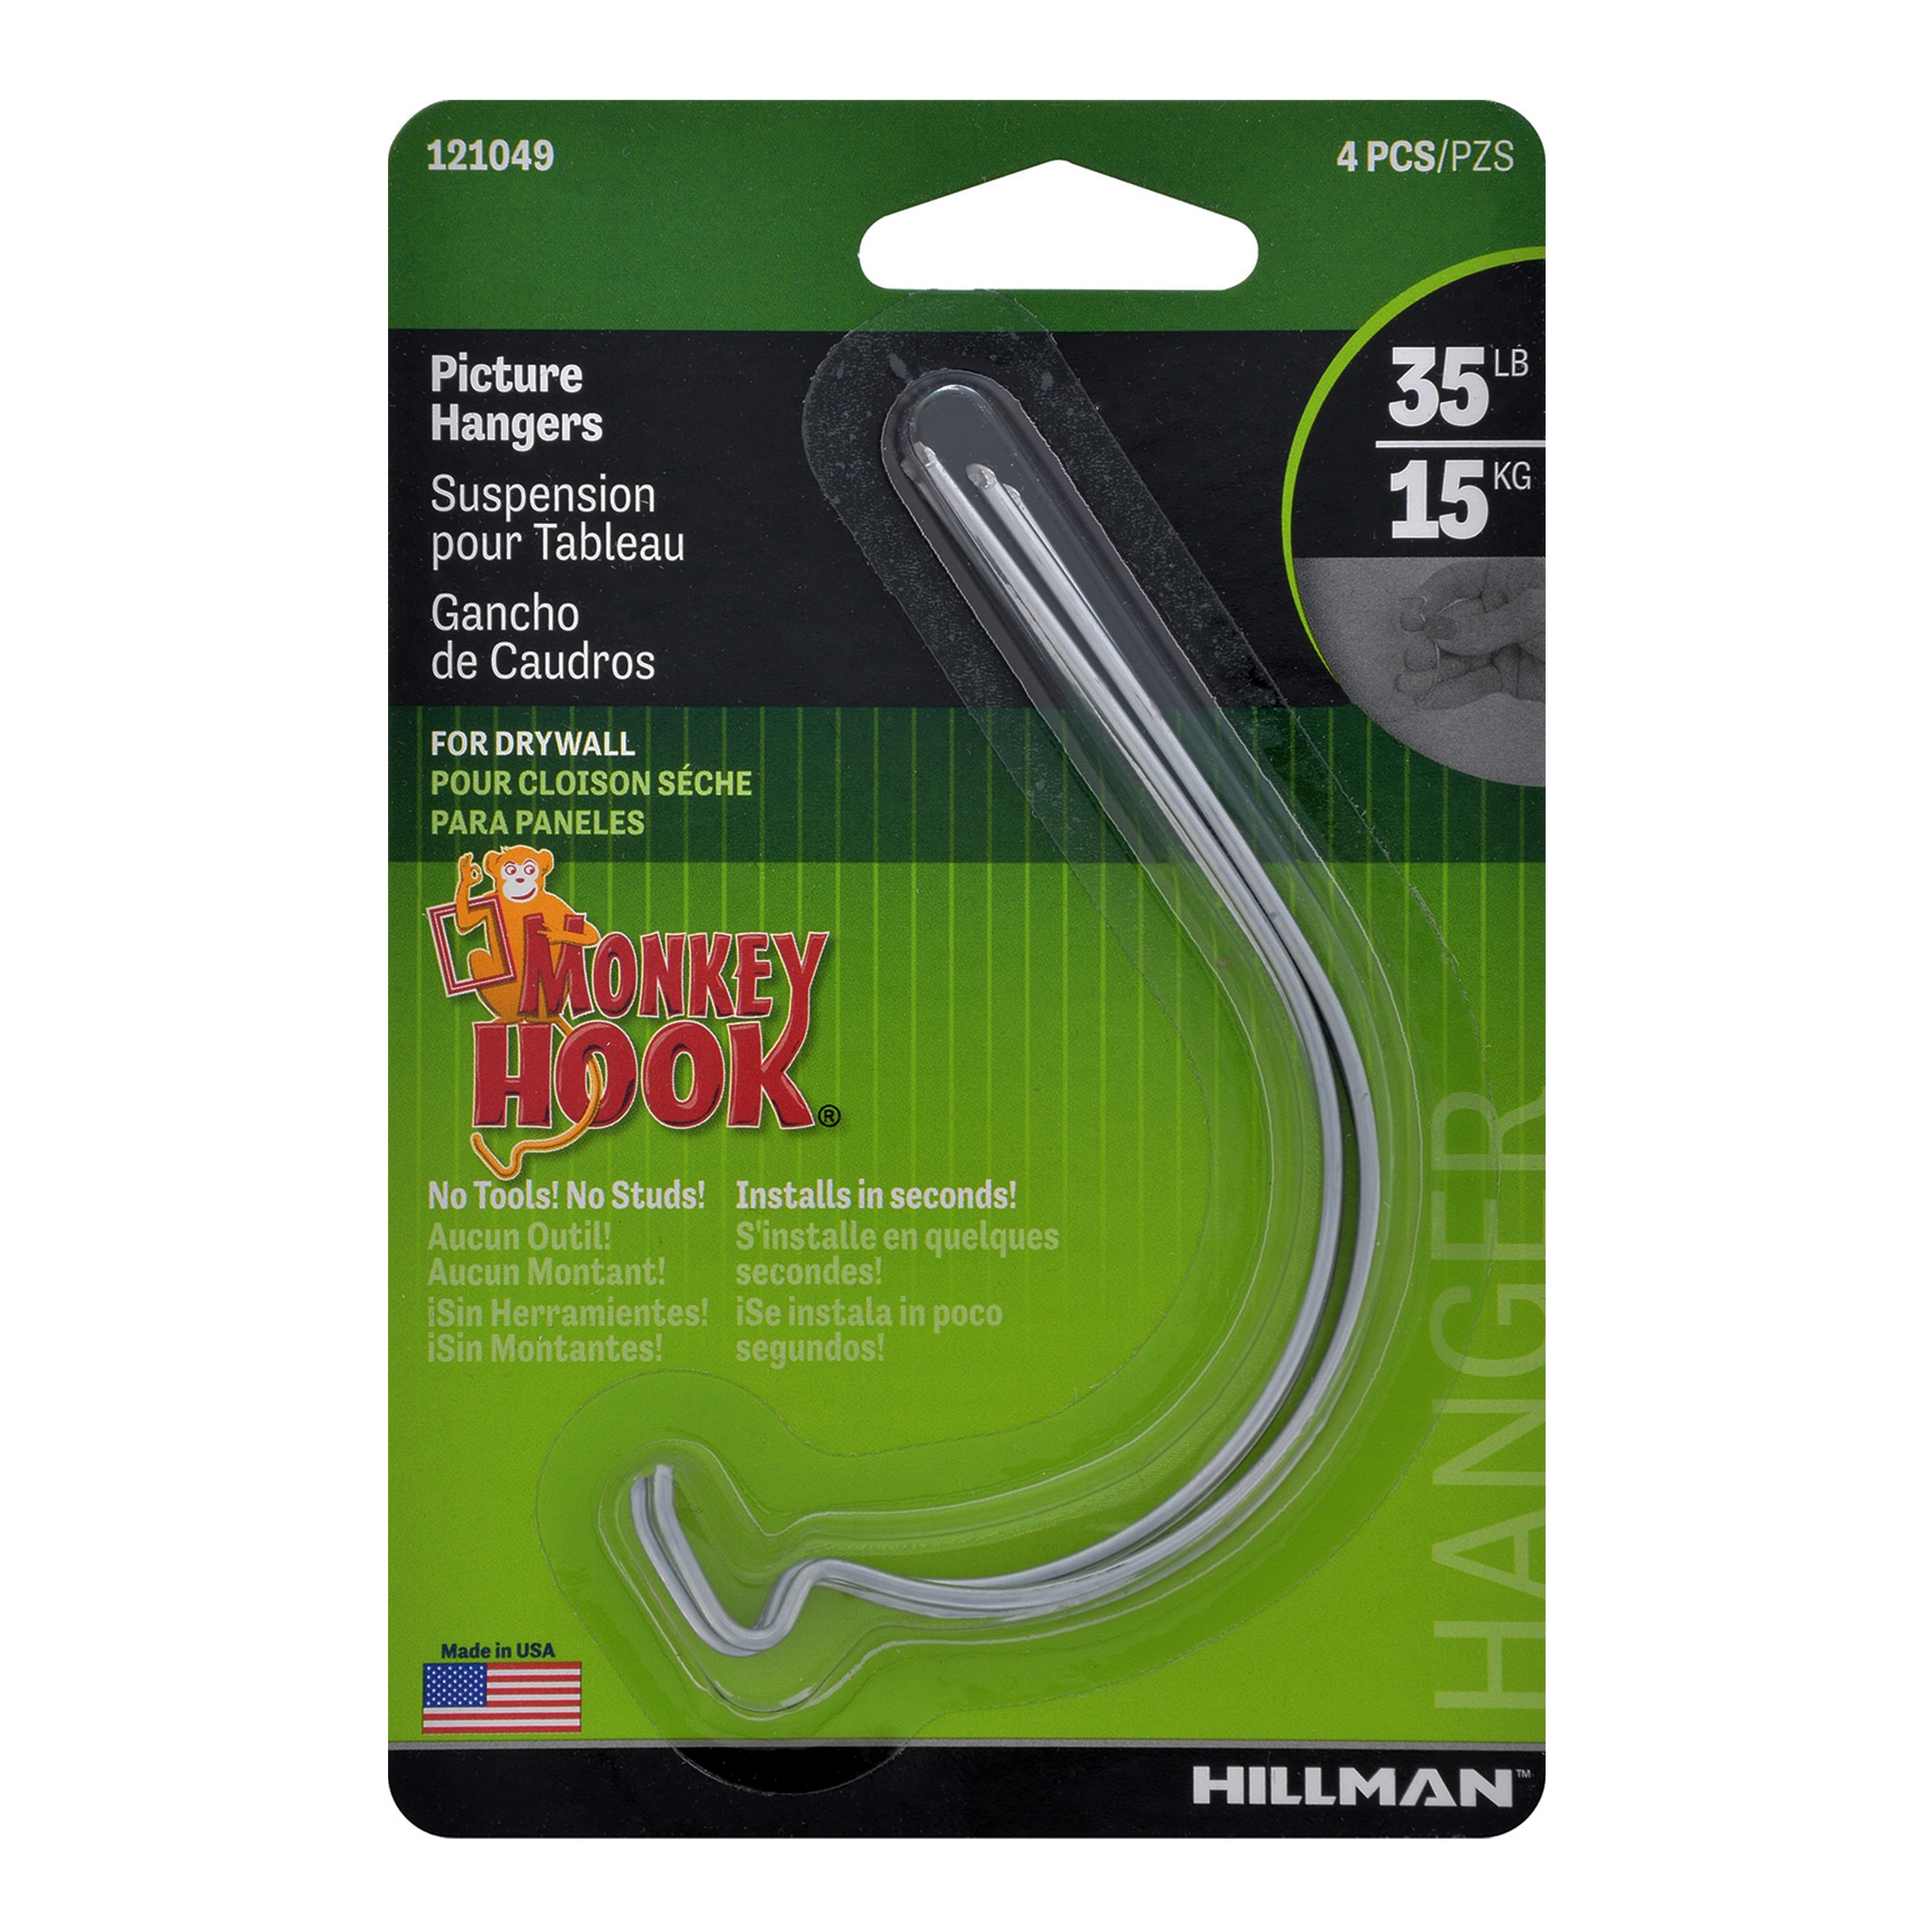 Hillman Monkey Hooks 35 Lbs Value Pack Of 4 in the Picture Hangers